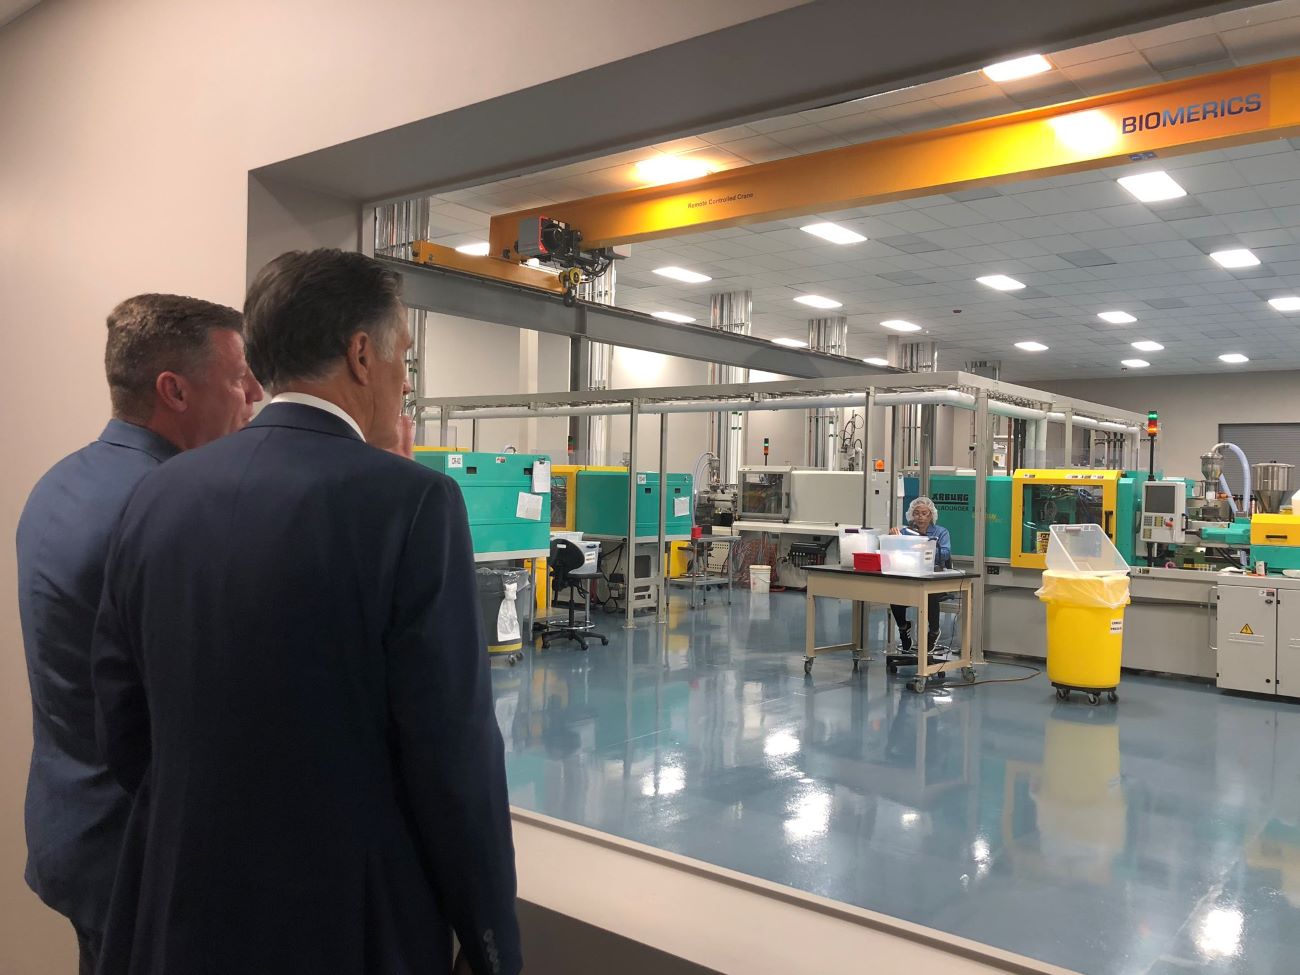 Mitt Romney on tour at Biomedical device manufacture plant